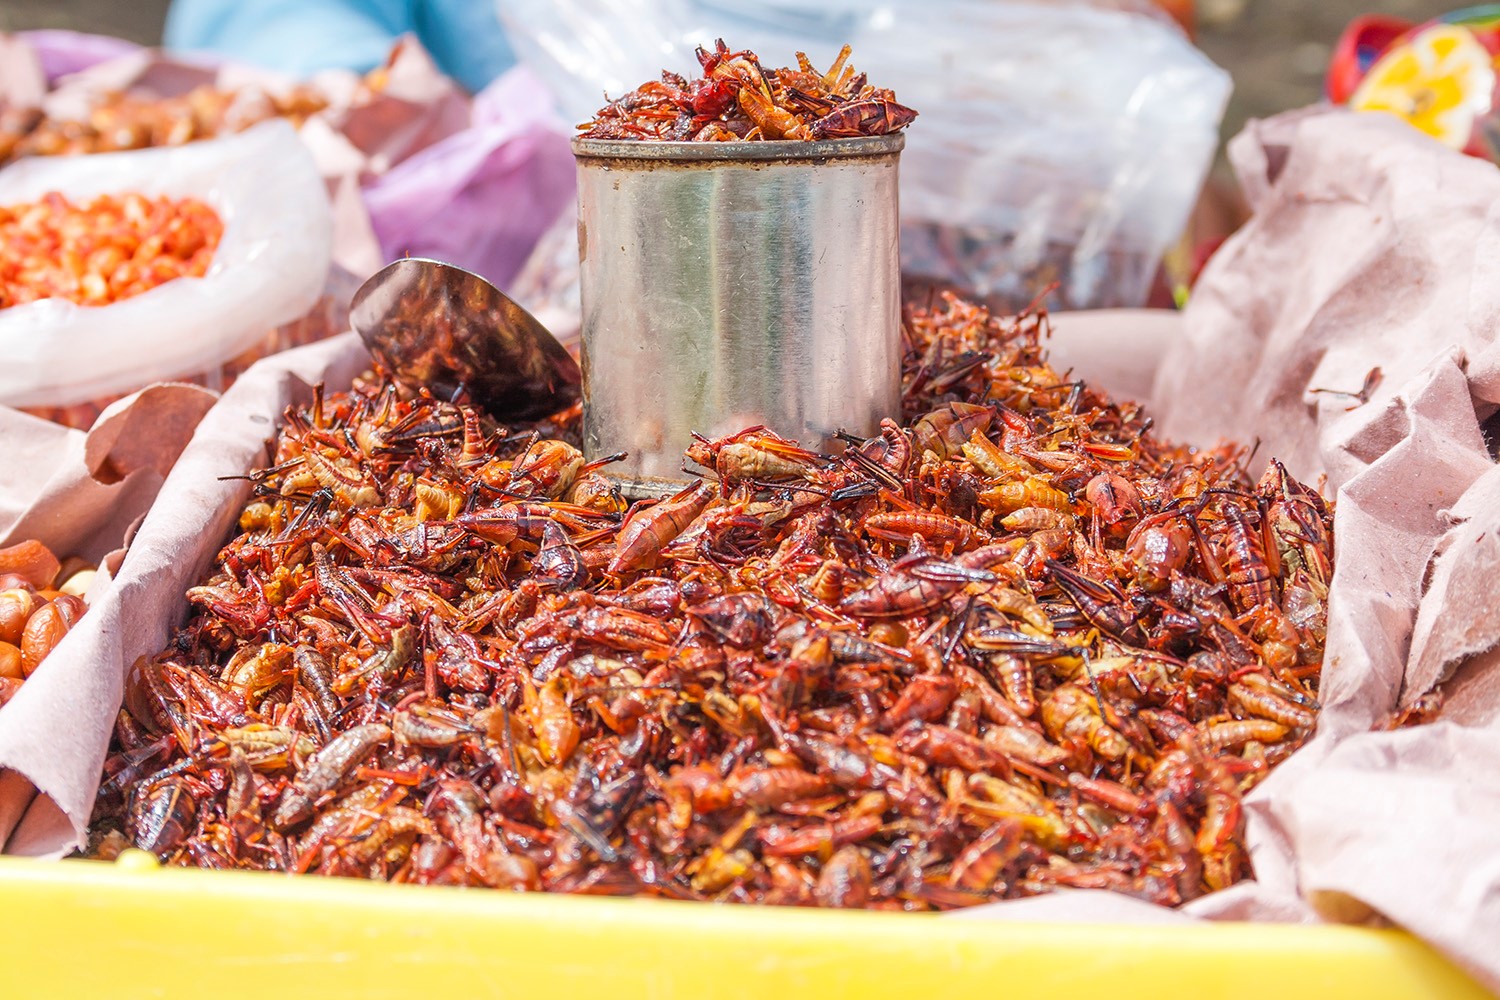 Chapulines are grasshoppers